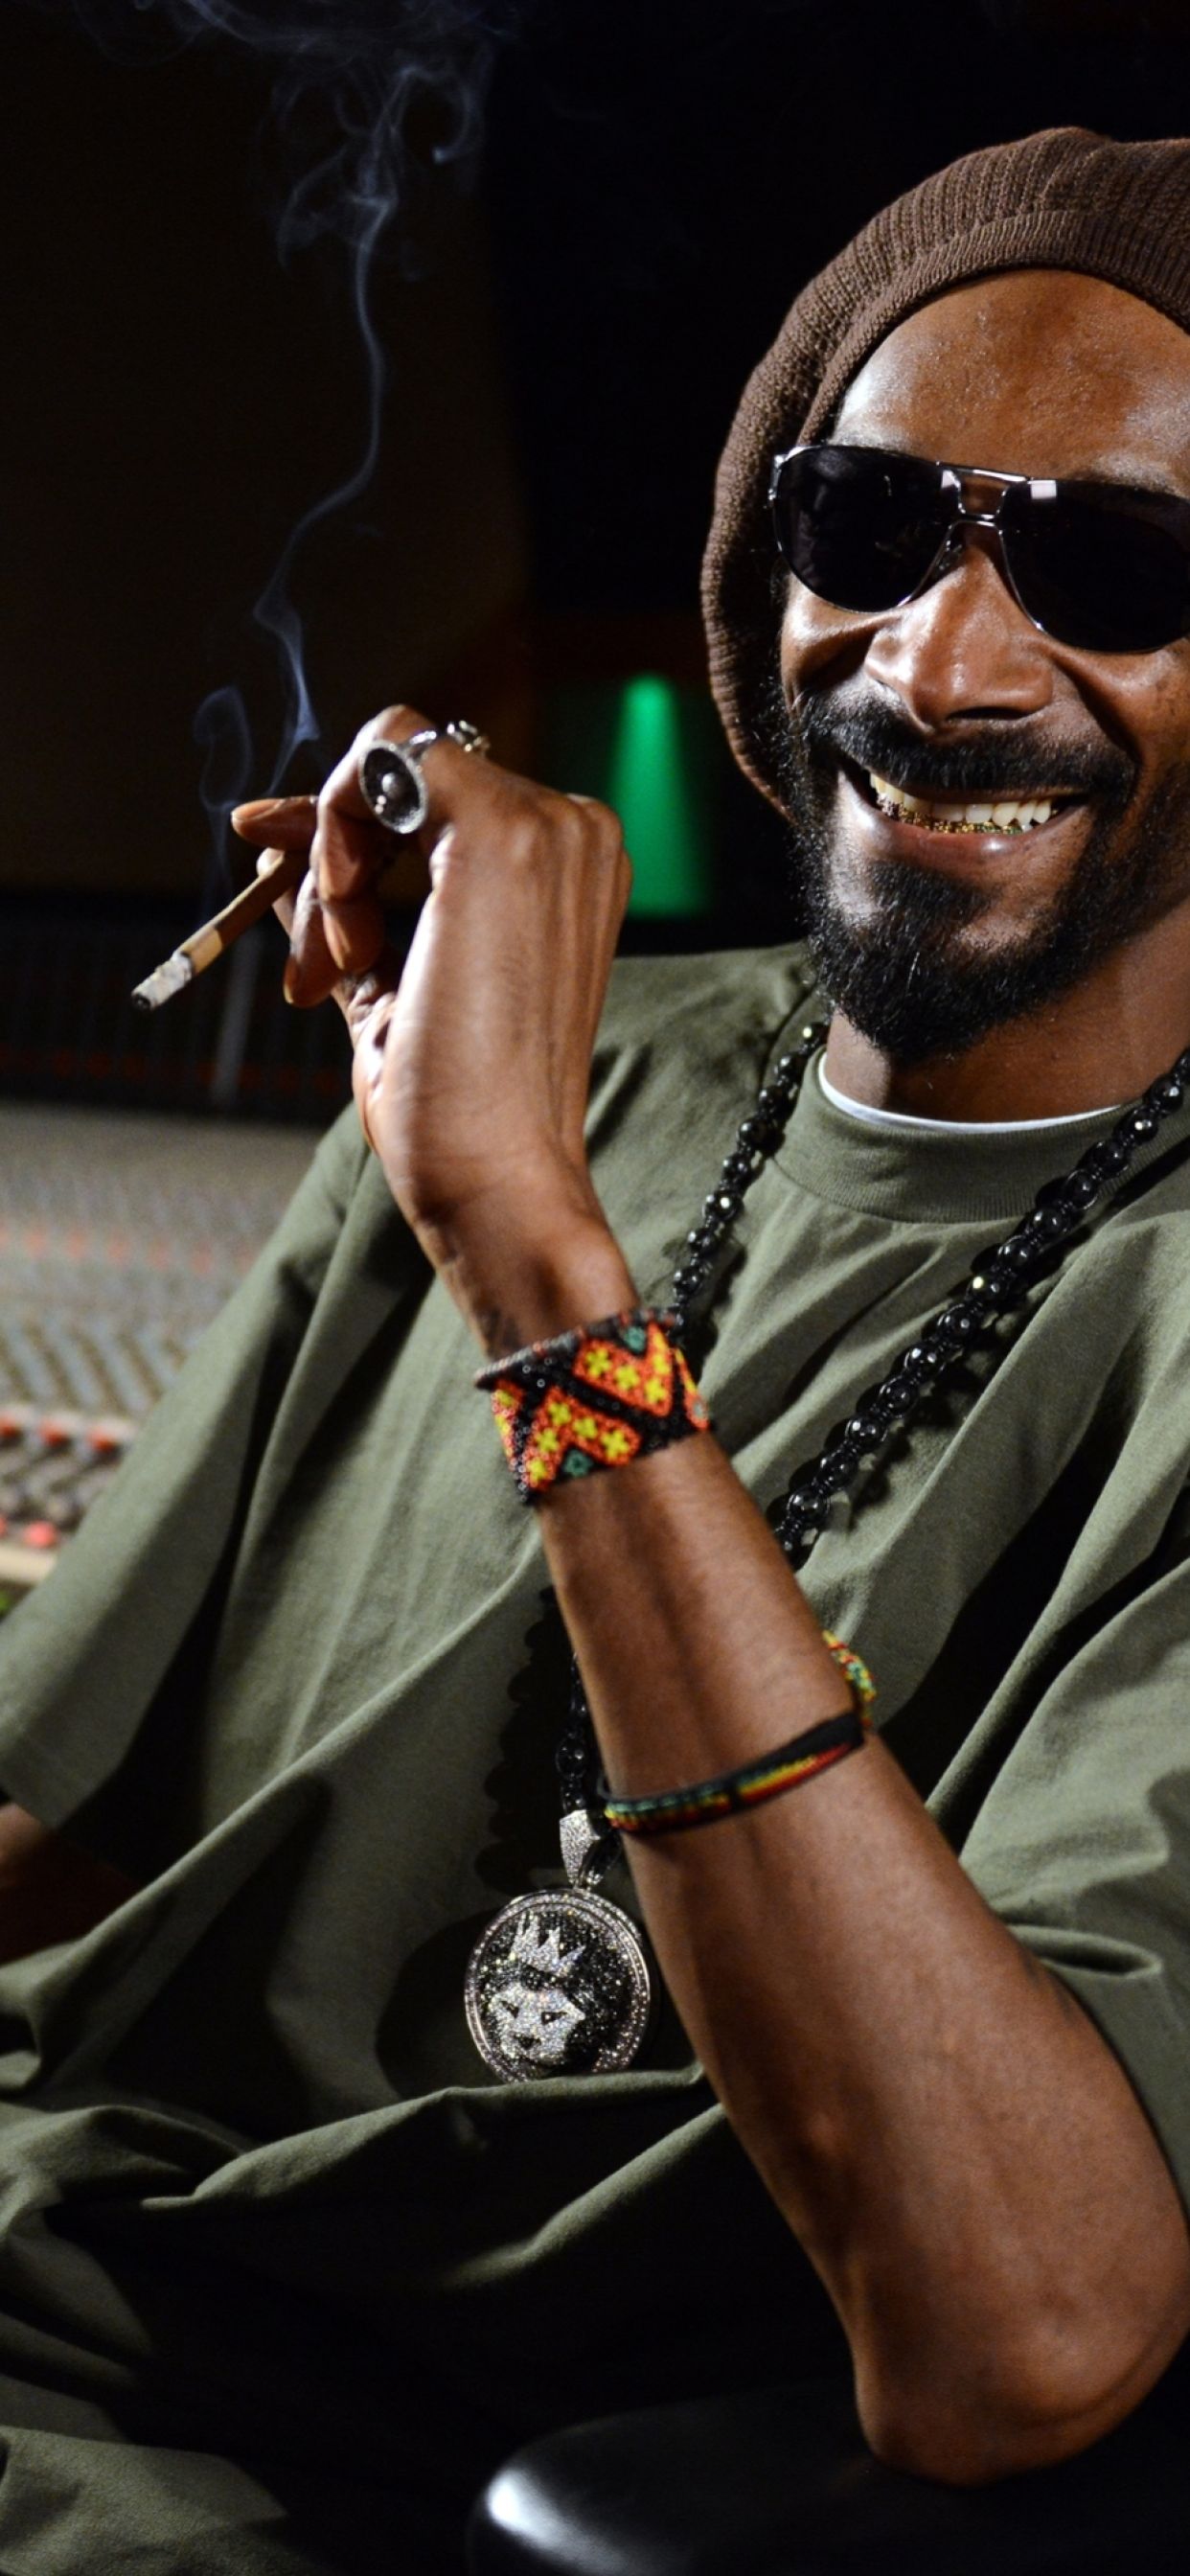 snoop dogg wallpapers wallpaper cave on snoop dogg wallpapers